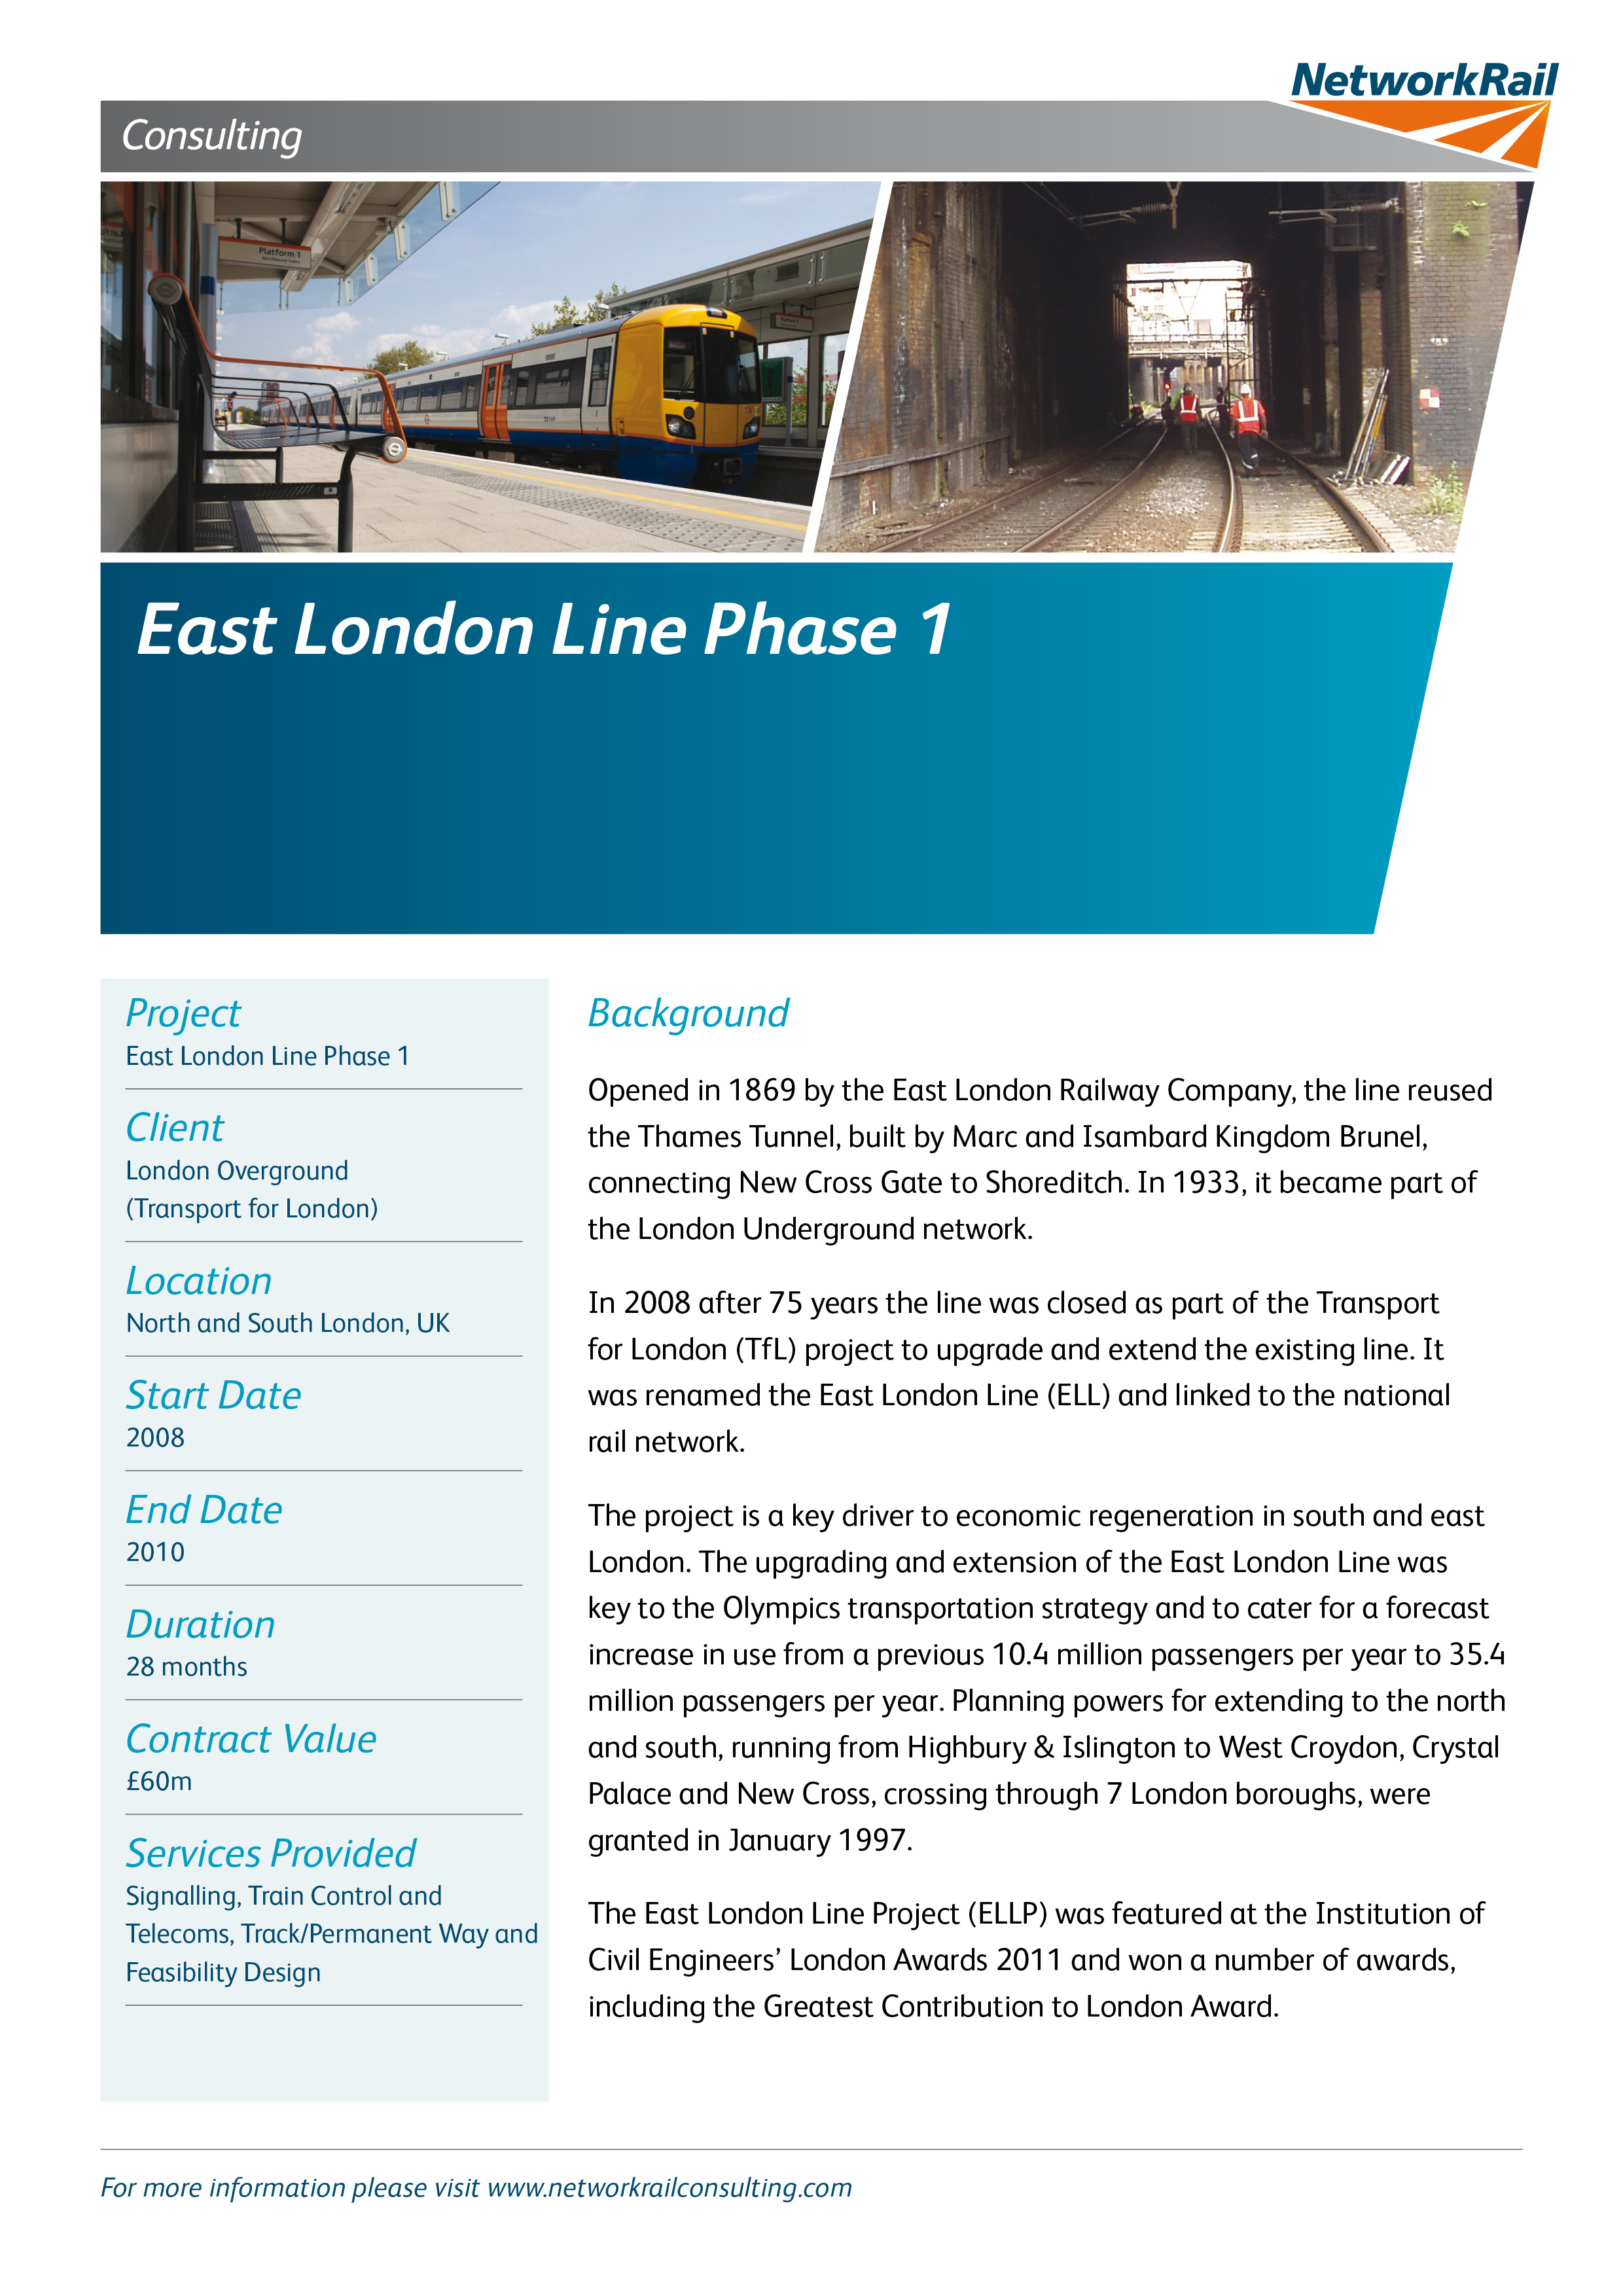 East London Line Phase 1